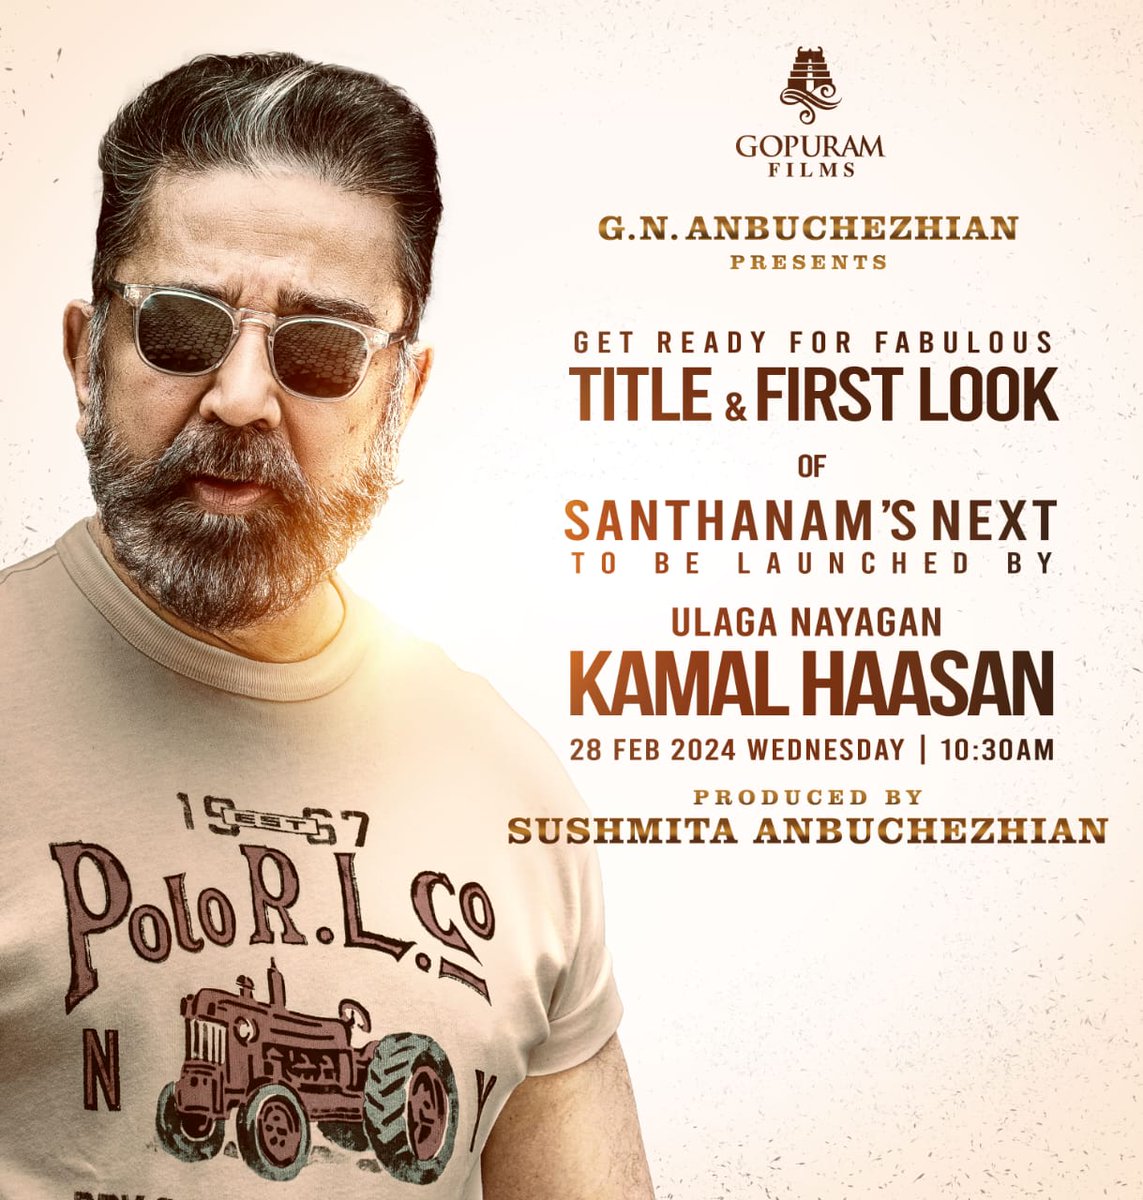 Title & First Look of @gopuramfilms #ProdNo5 will be released Tomorrow at 10:30 Am by #UlagaNayagan @ikamalhaasan

Presented by #GNAnbuchezhian, Produced by #SushmitaAnbuchezhian, Starring @iamsanthanam & directed by @dirnanand